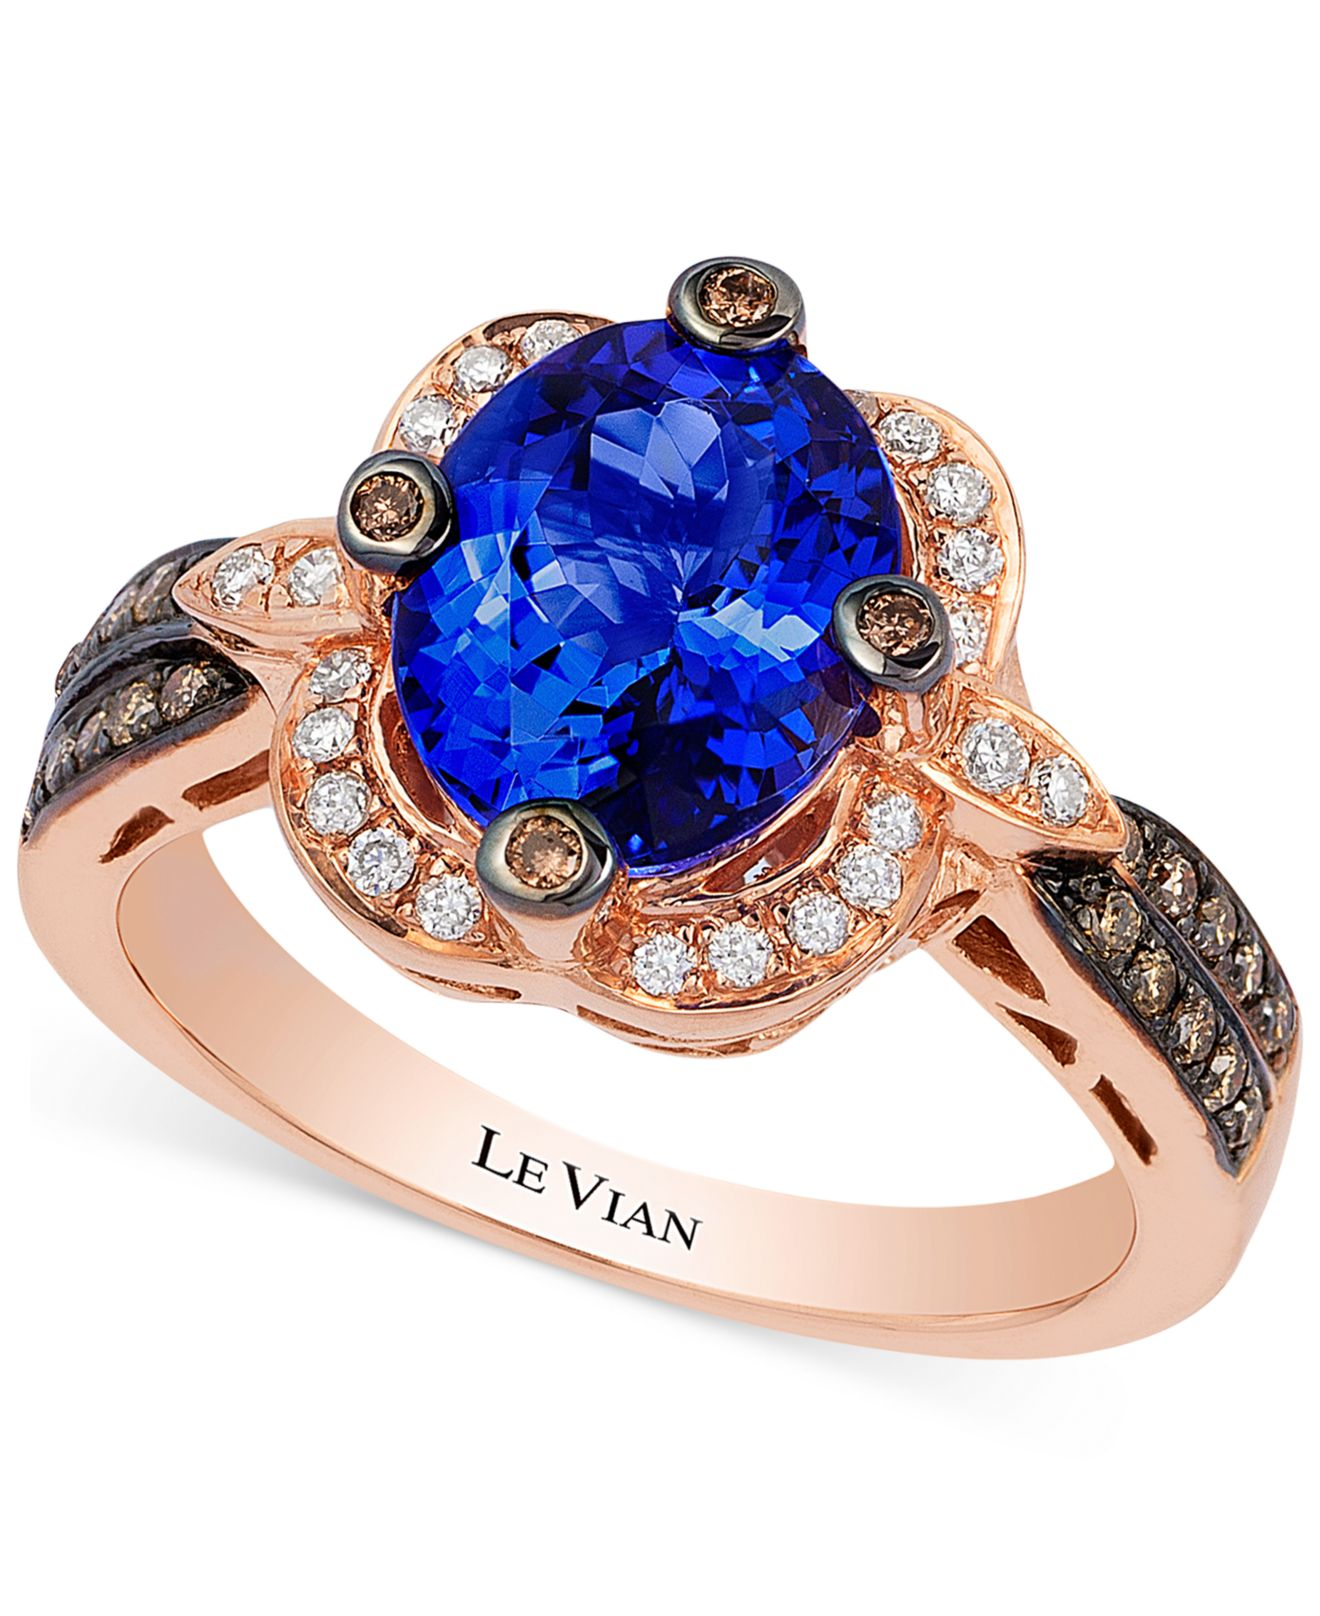 Le vian Chocolatier Blueberry Tanzanite (2 Ct. T.w) And Diamond (1/3 Ct. T.w) Ring In 14k Rose